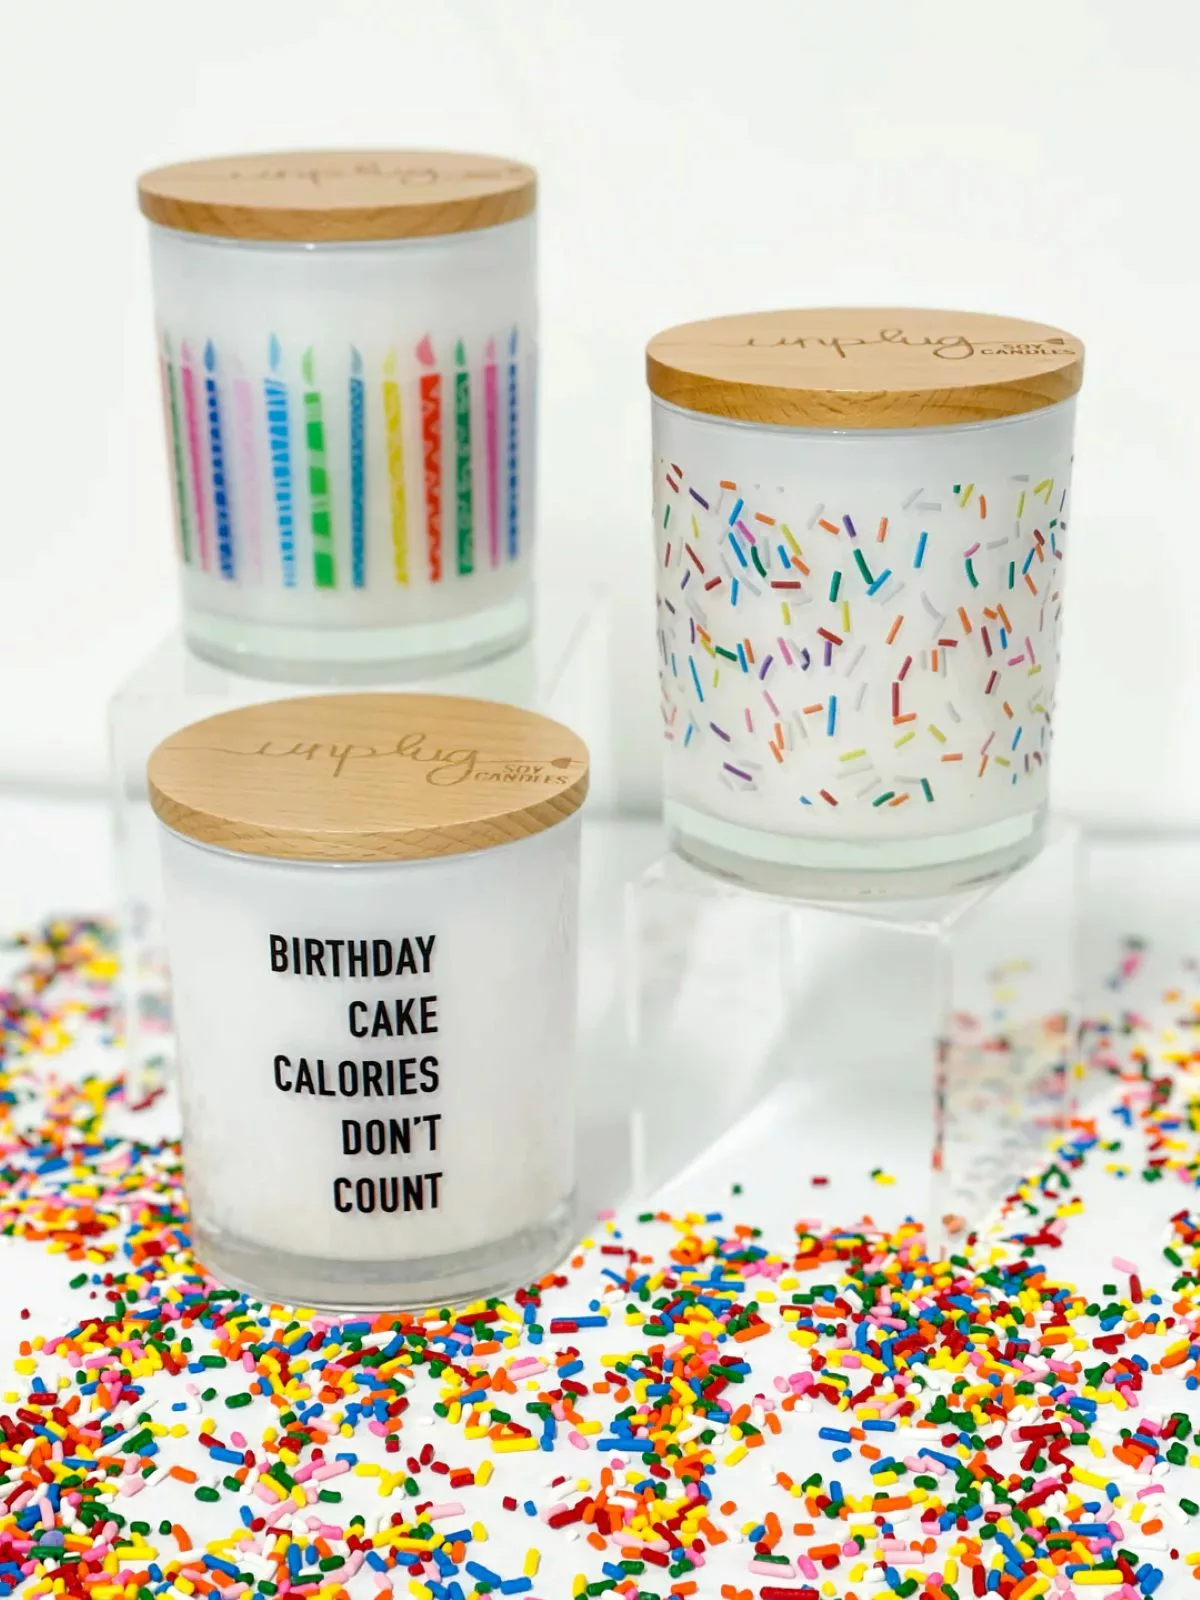 Unplug Soy Candles - Birthday Calories Don’t Count Candles